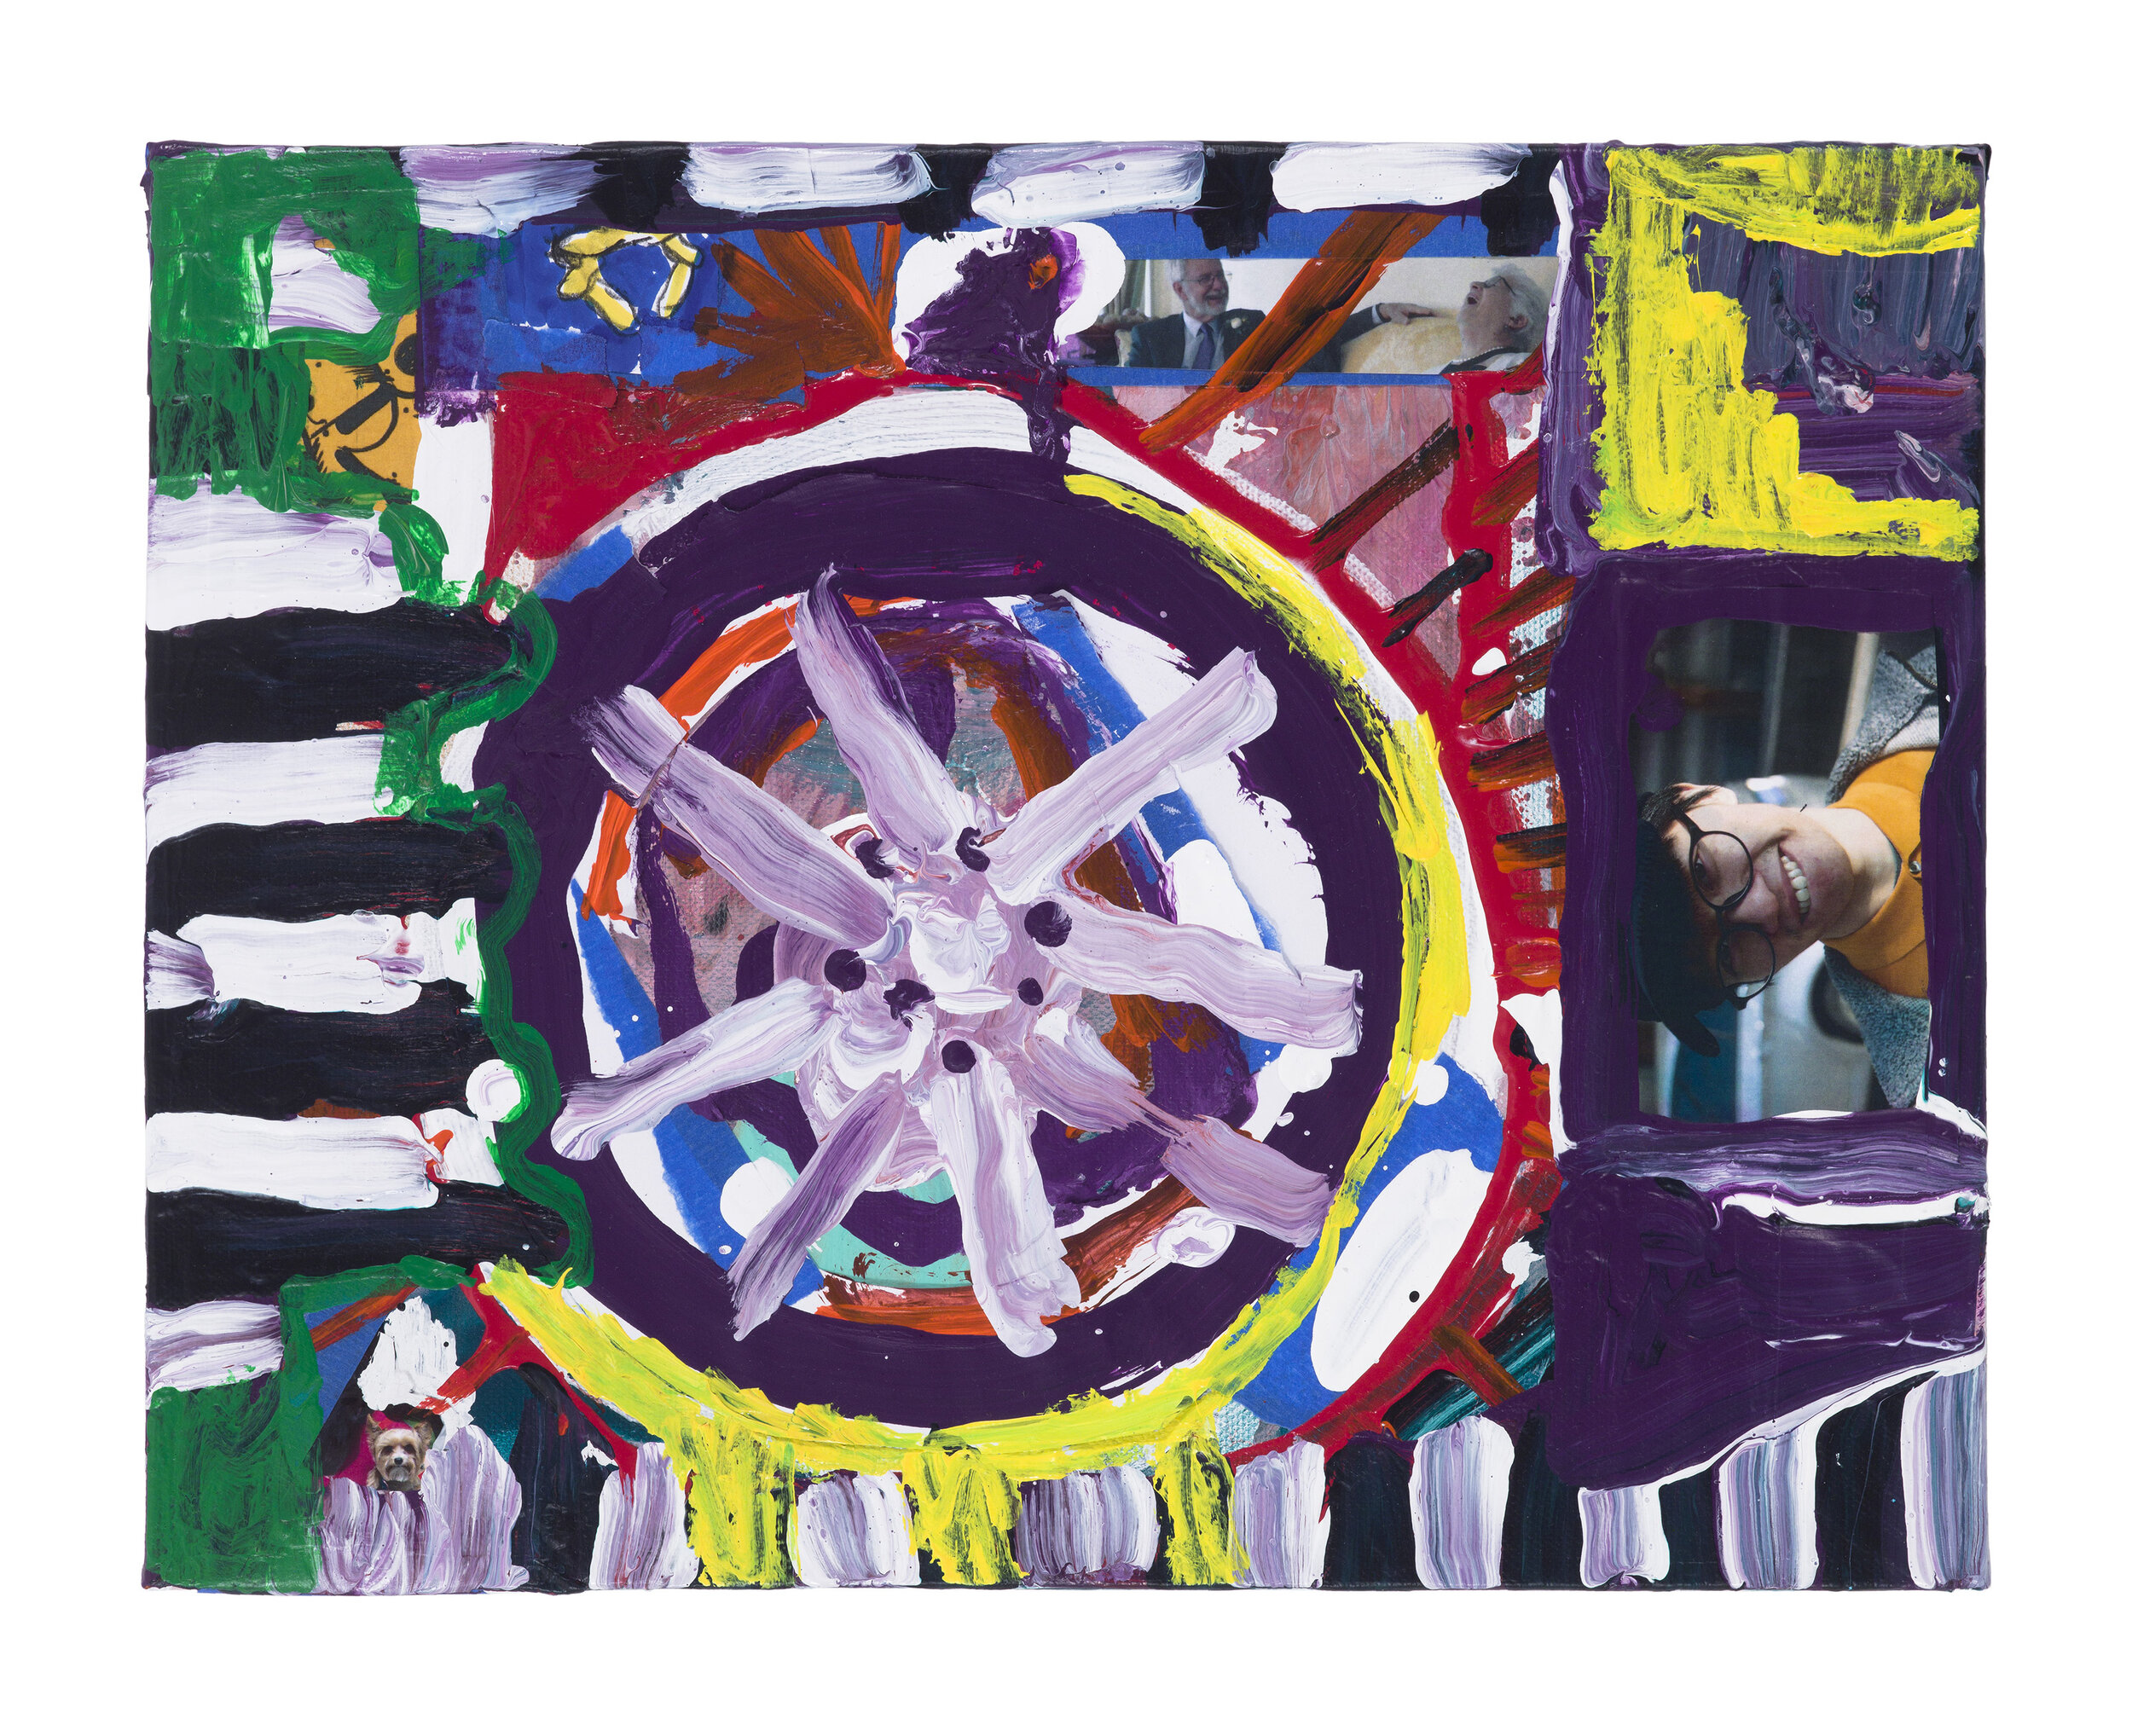  Drew Beattie and Ben Shepard  Job and the Wheel   2019   acrylic and collage on canvas 11 x 14 inches 